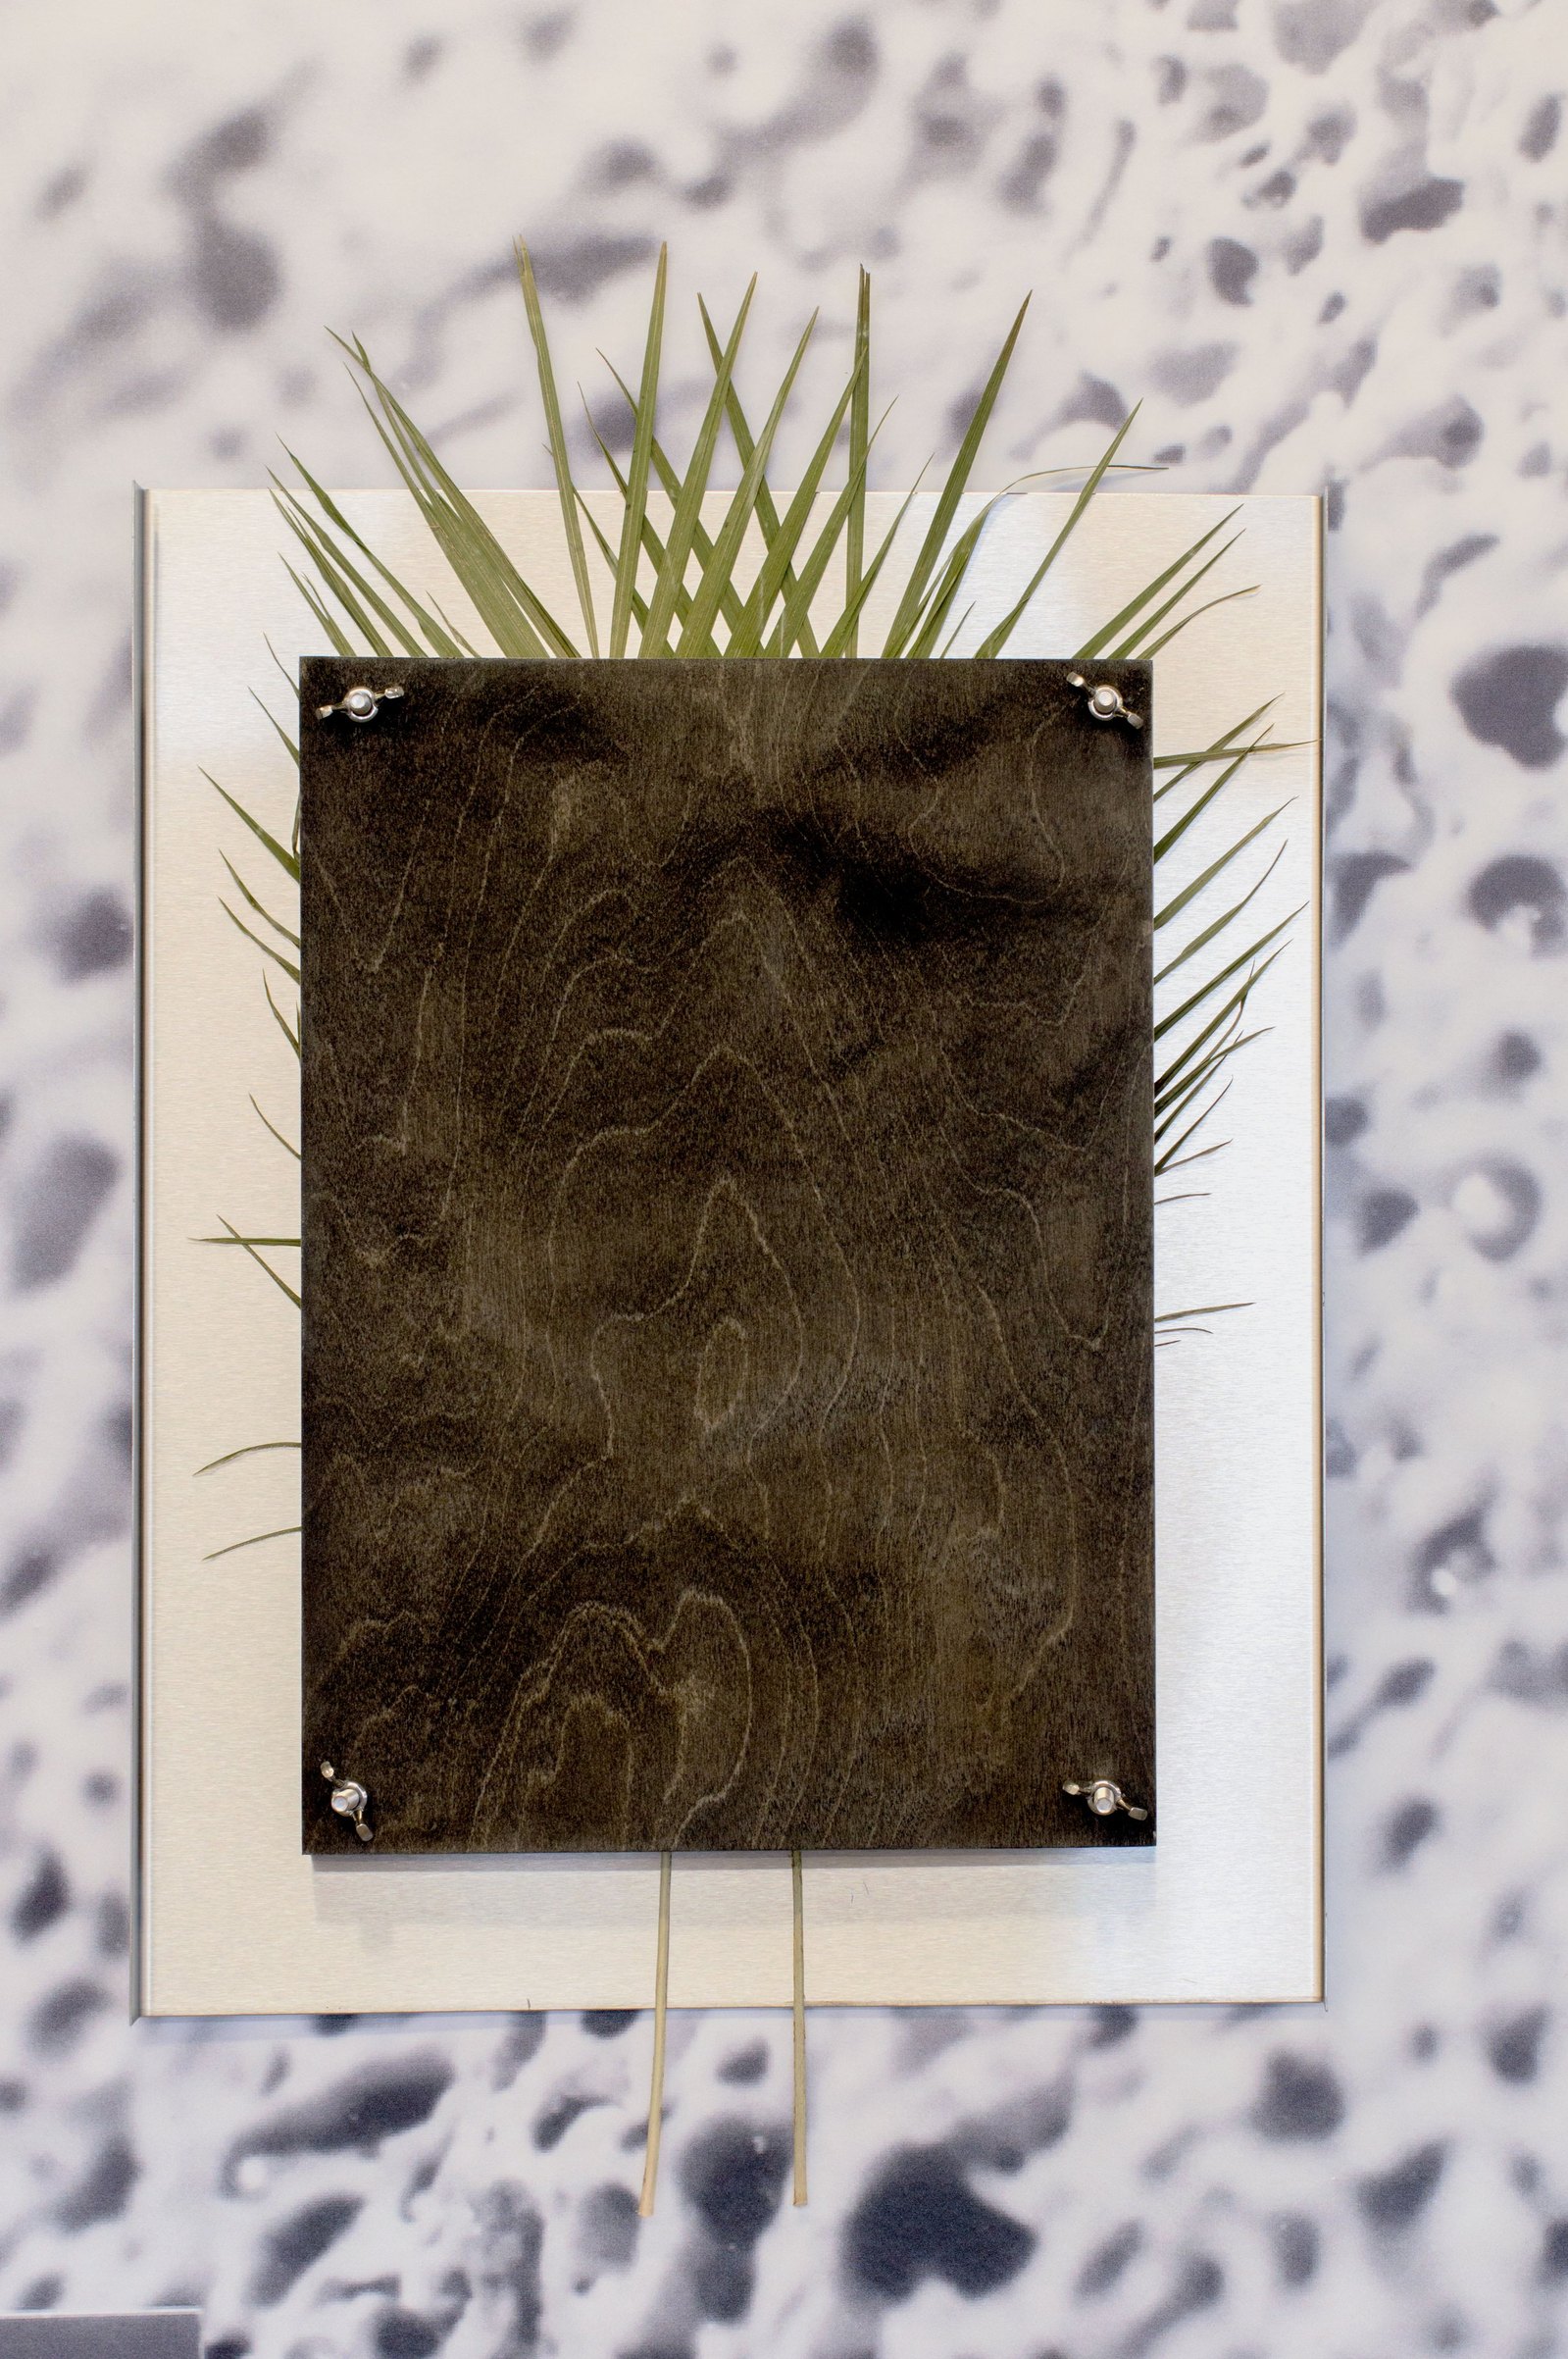 A rectangular stainless steel and plywood sculpture with dried flowers pressed between. Jamie Kane